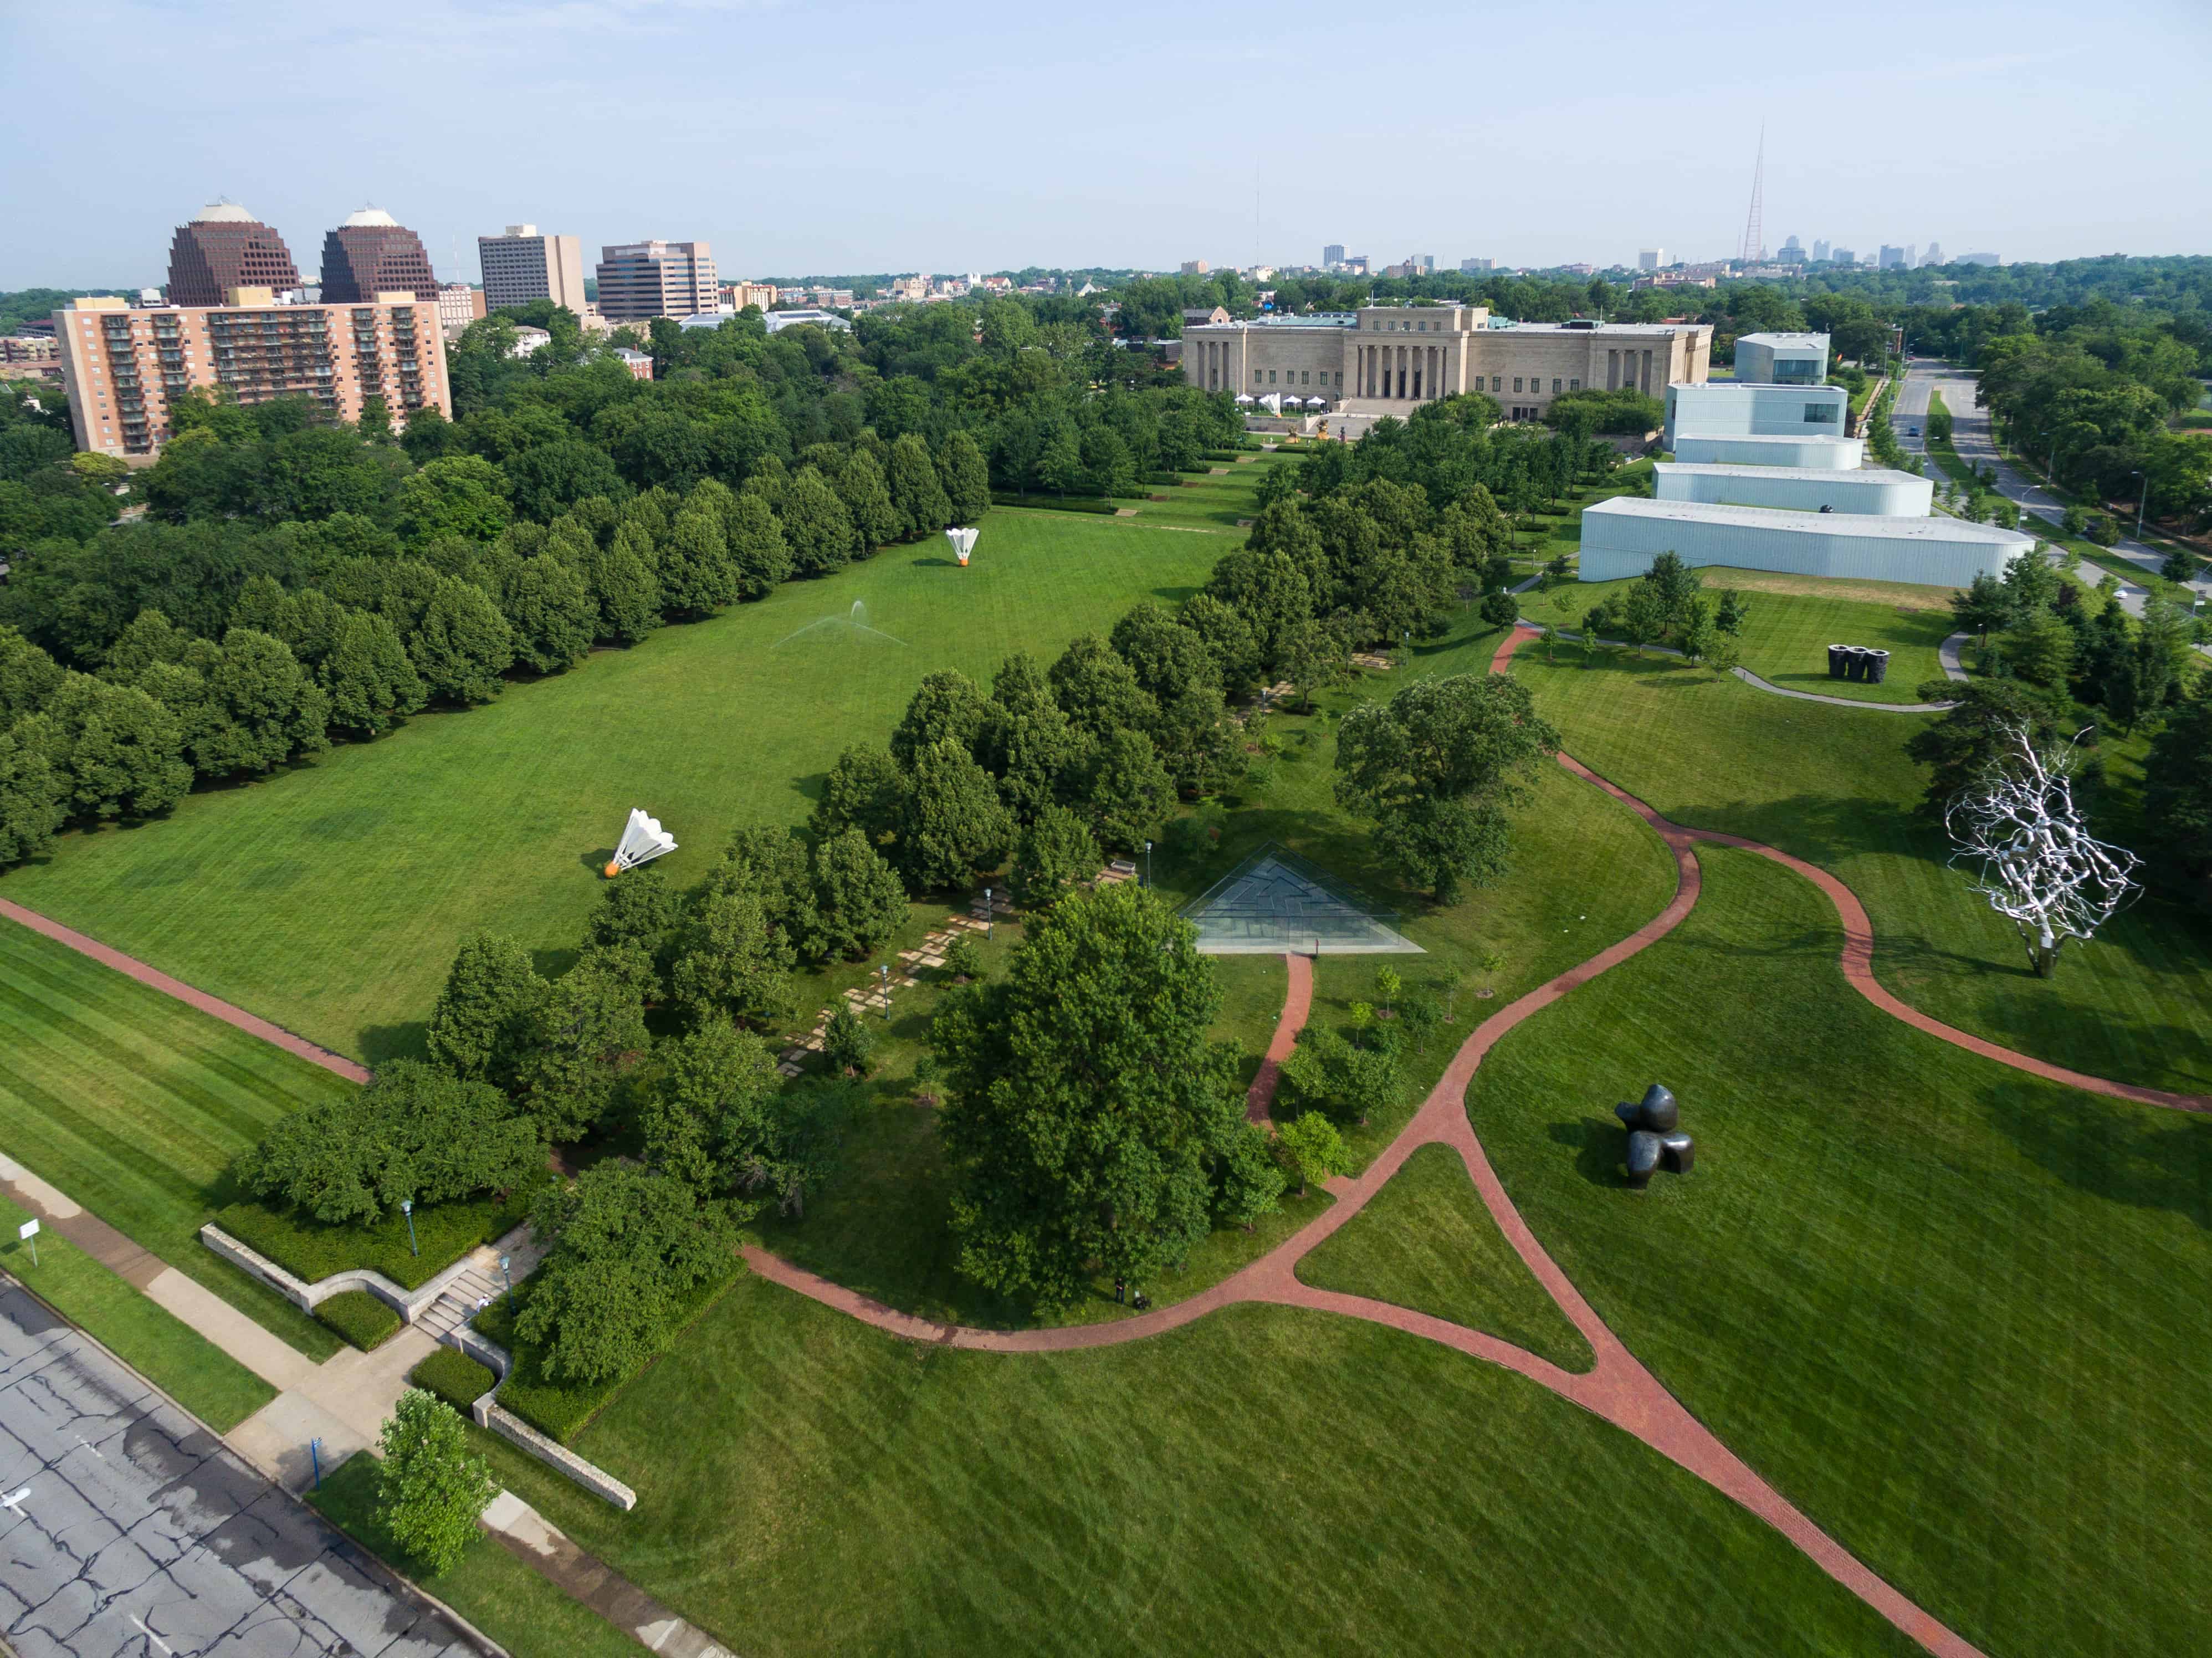 A bird's eye view of the Nelson-Atkins Museum of Art. Enormous sculptures decorate the green parkland surrounding the museum.